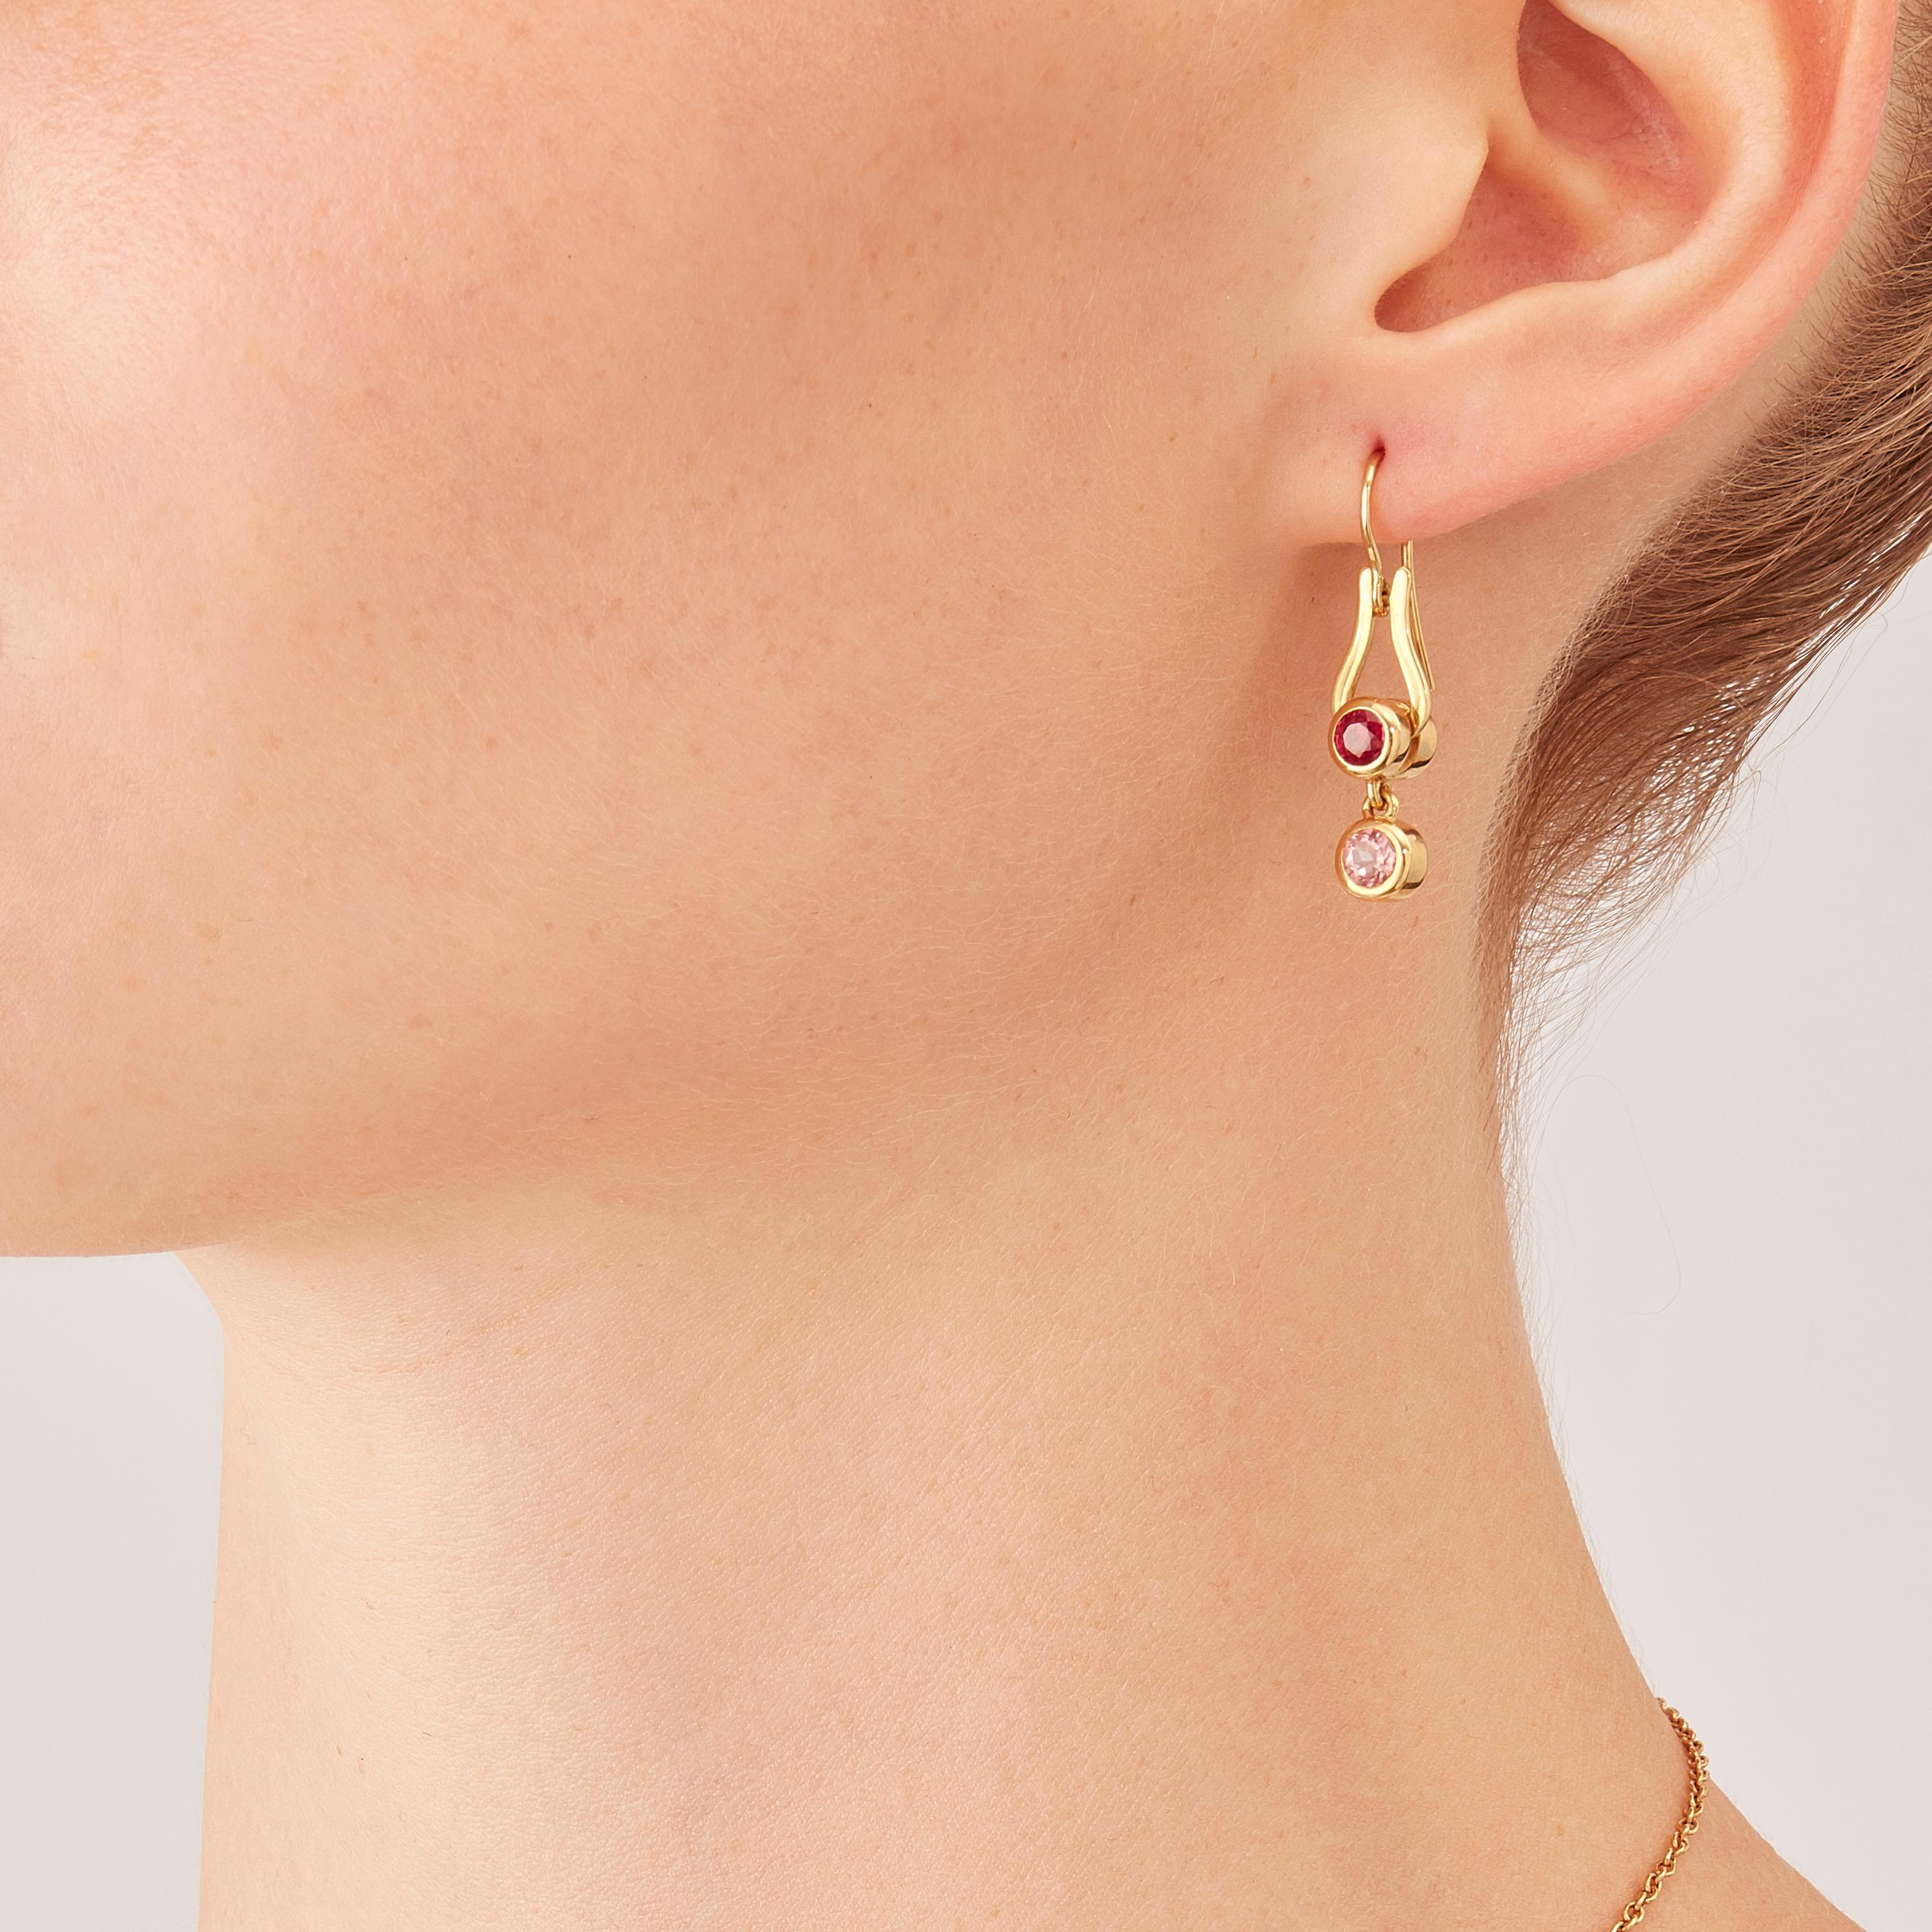 Made by hand in Nathalie Jean's Milan atelier, Microcosmos Earrings in 18 karat rosé gold, a warm, sophisticated color close to yellow gold, are devised as a game, a construction or a sophisticated aerial mobile. Shapes attached to gold settings